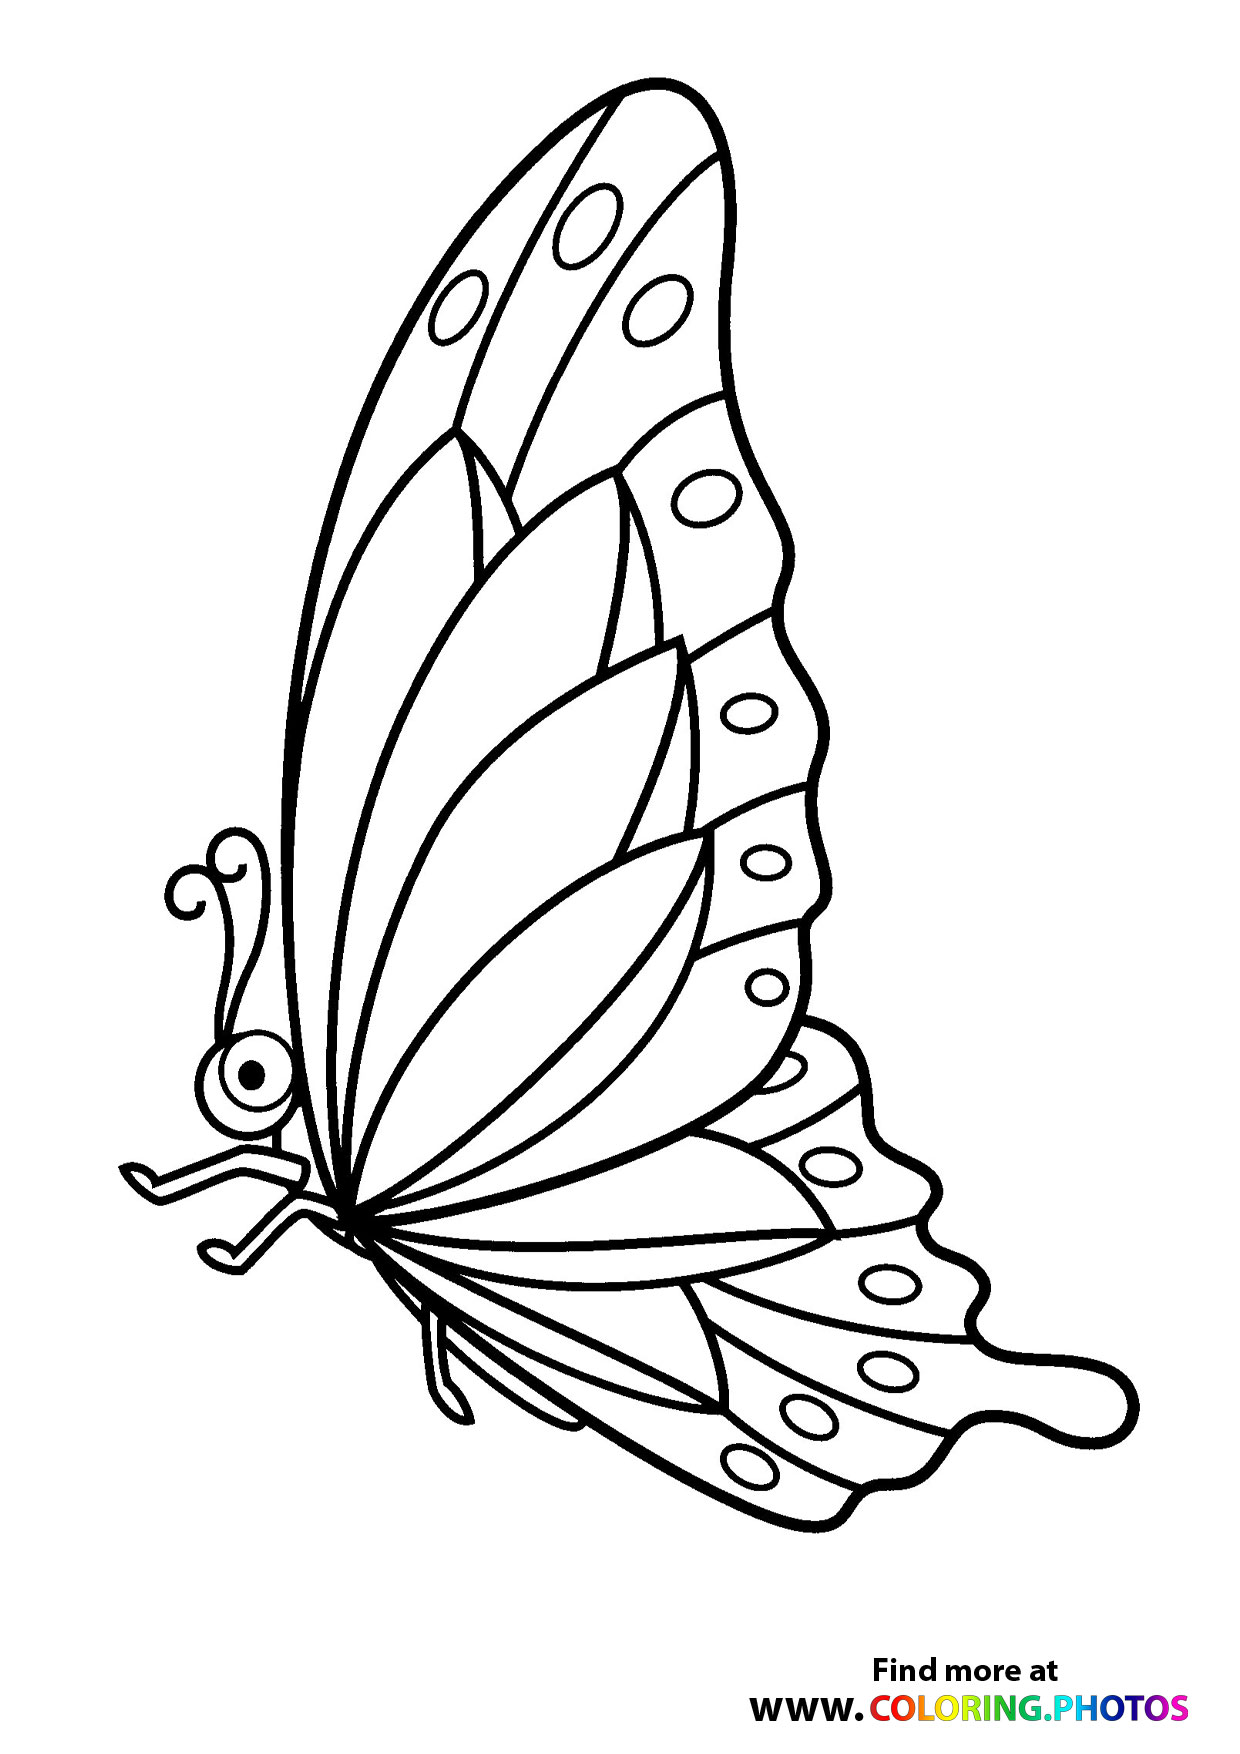 Butterfly with beautiful wings - Coloring Pages for kids